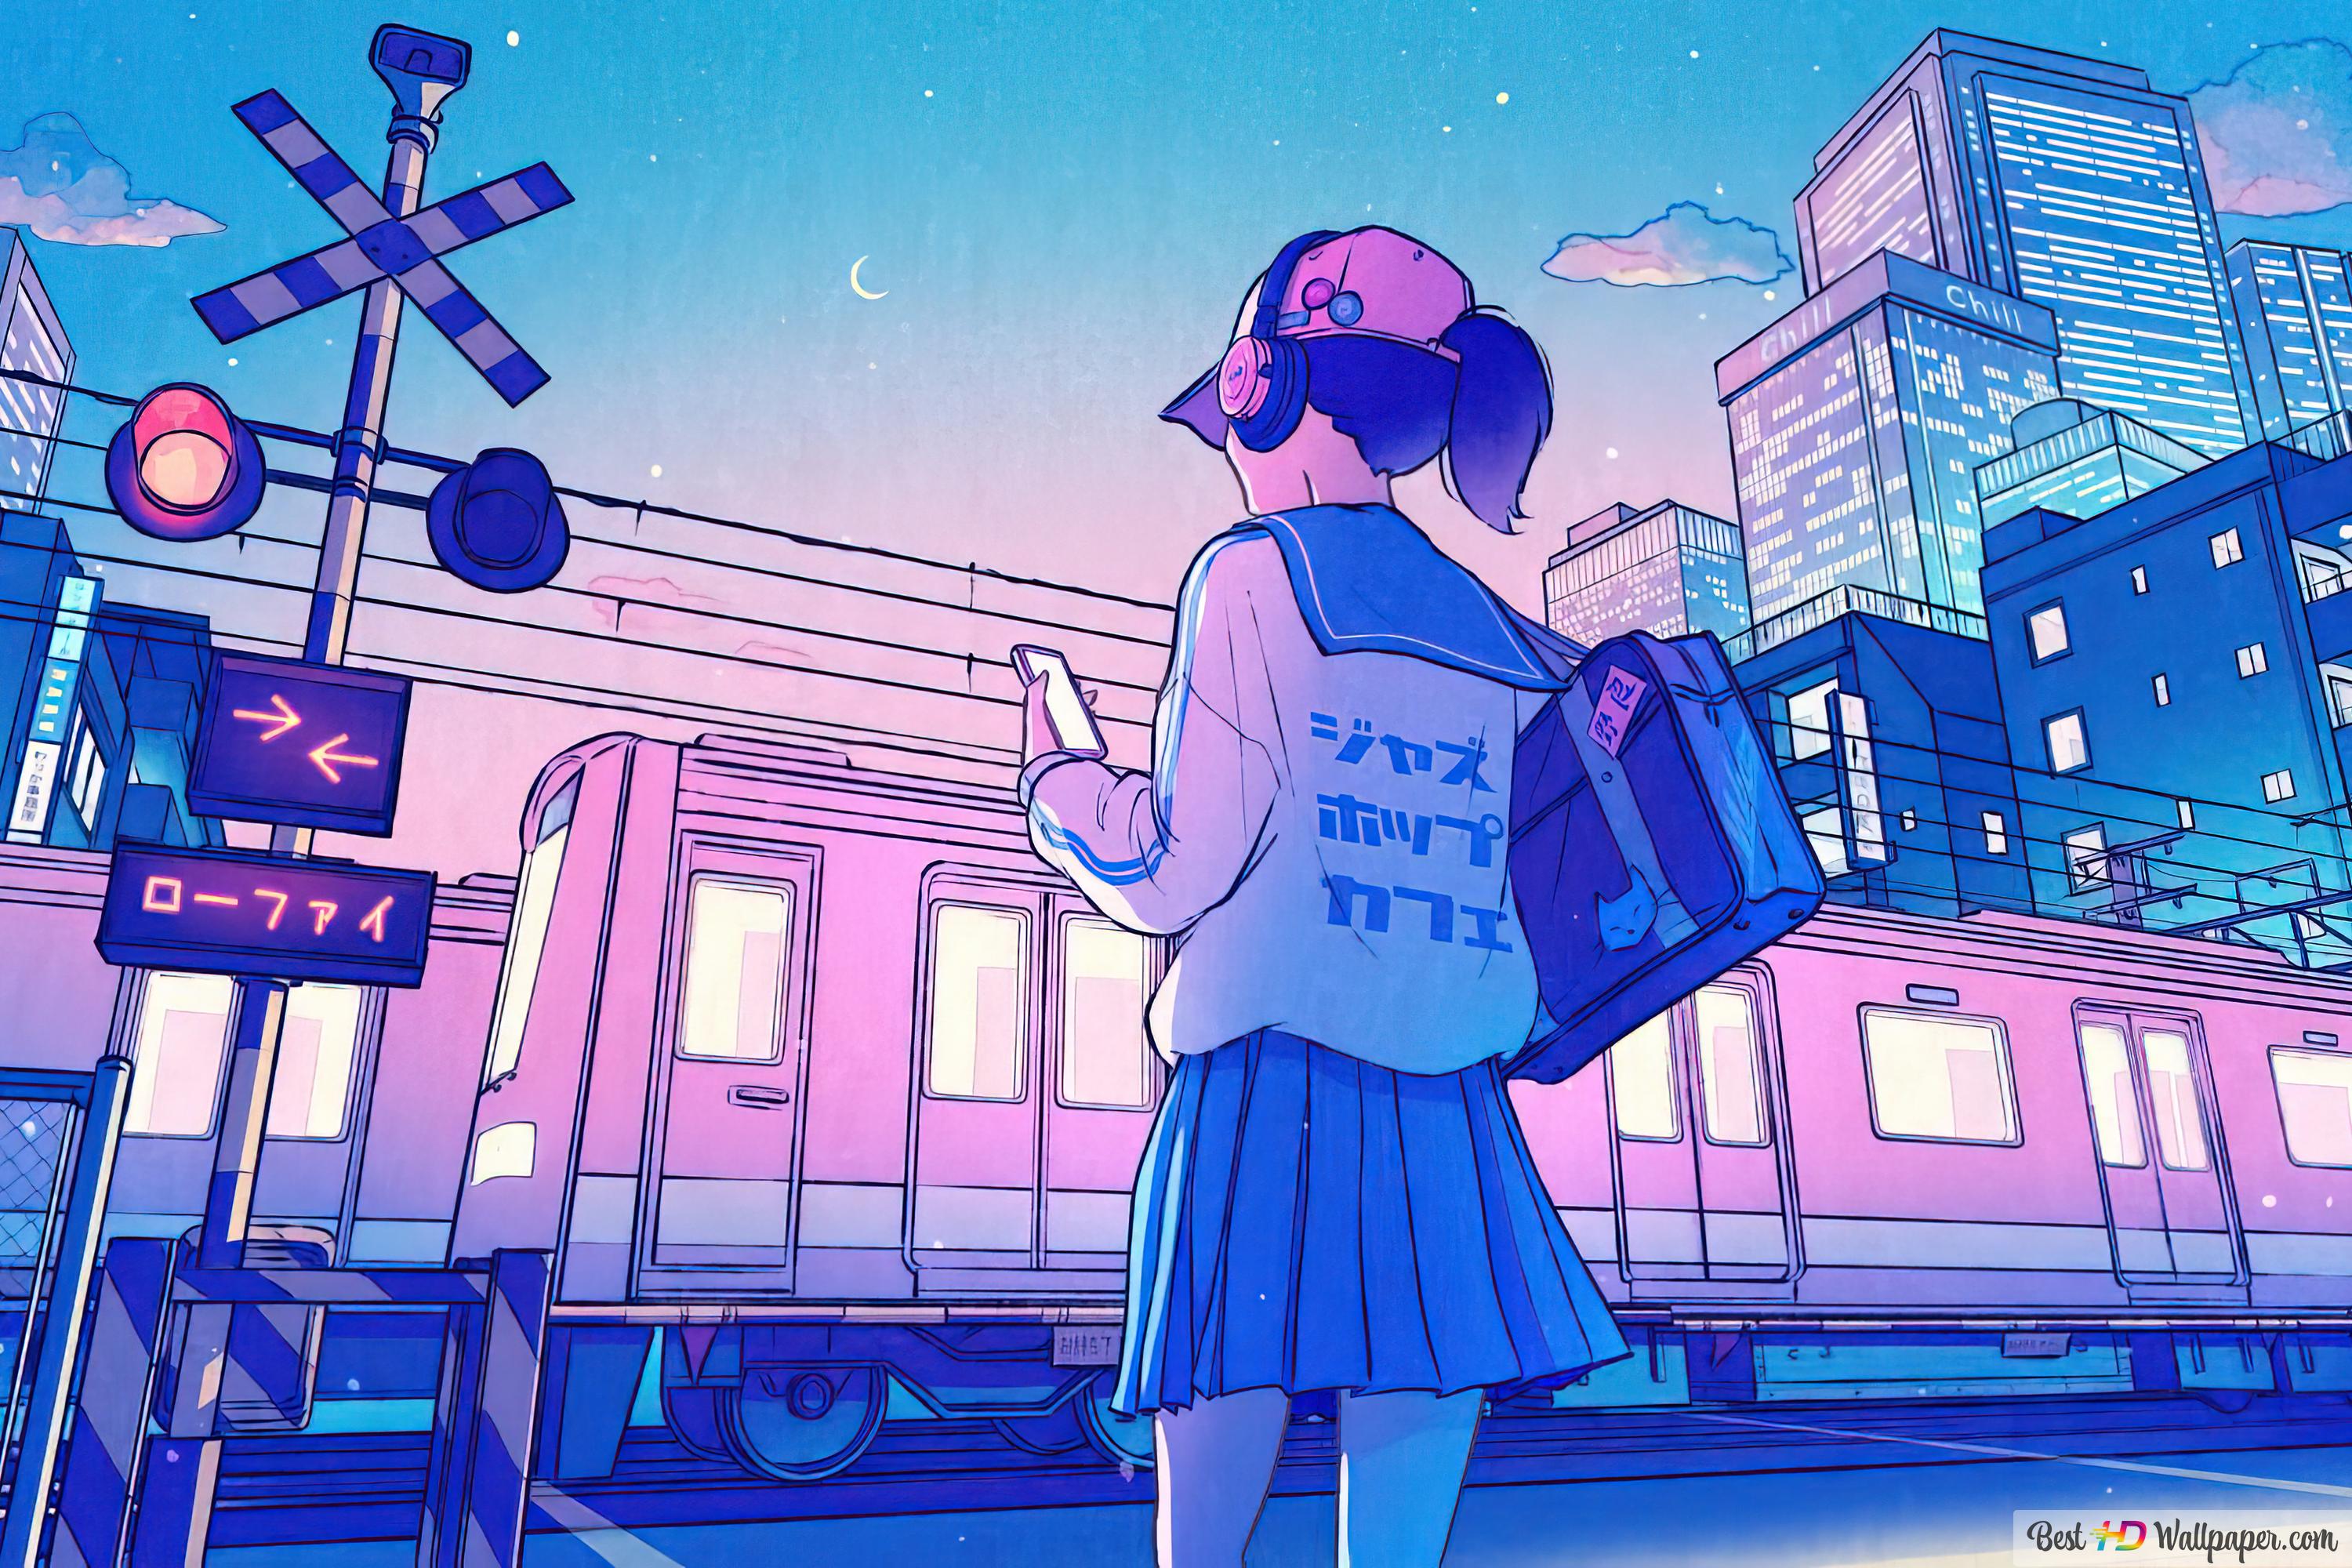 A girl in a skirt and a backpack standing on the platform waiting for the train. - City, anime, art